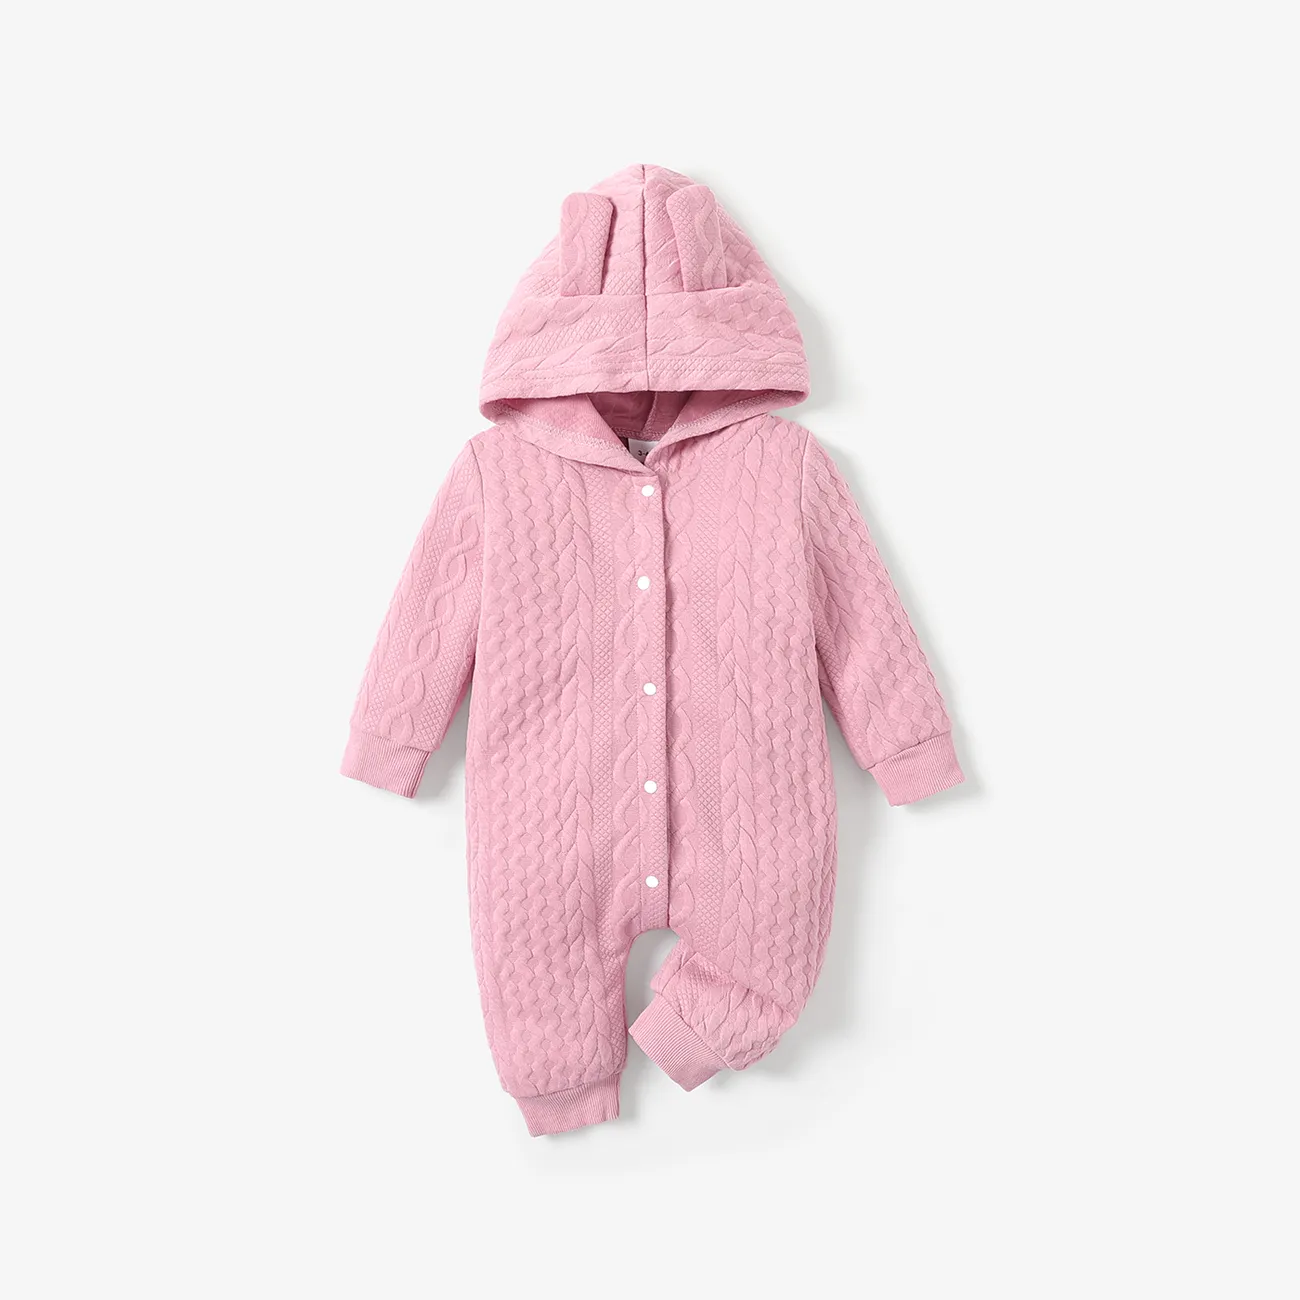 Solid Knitted Hooded Long-sleeve Pink Baby Jumpsuit Pink big image 1